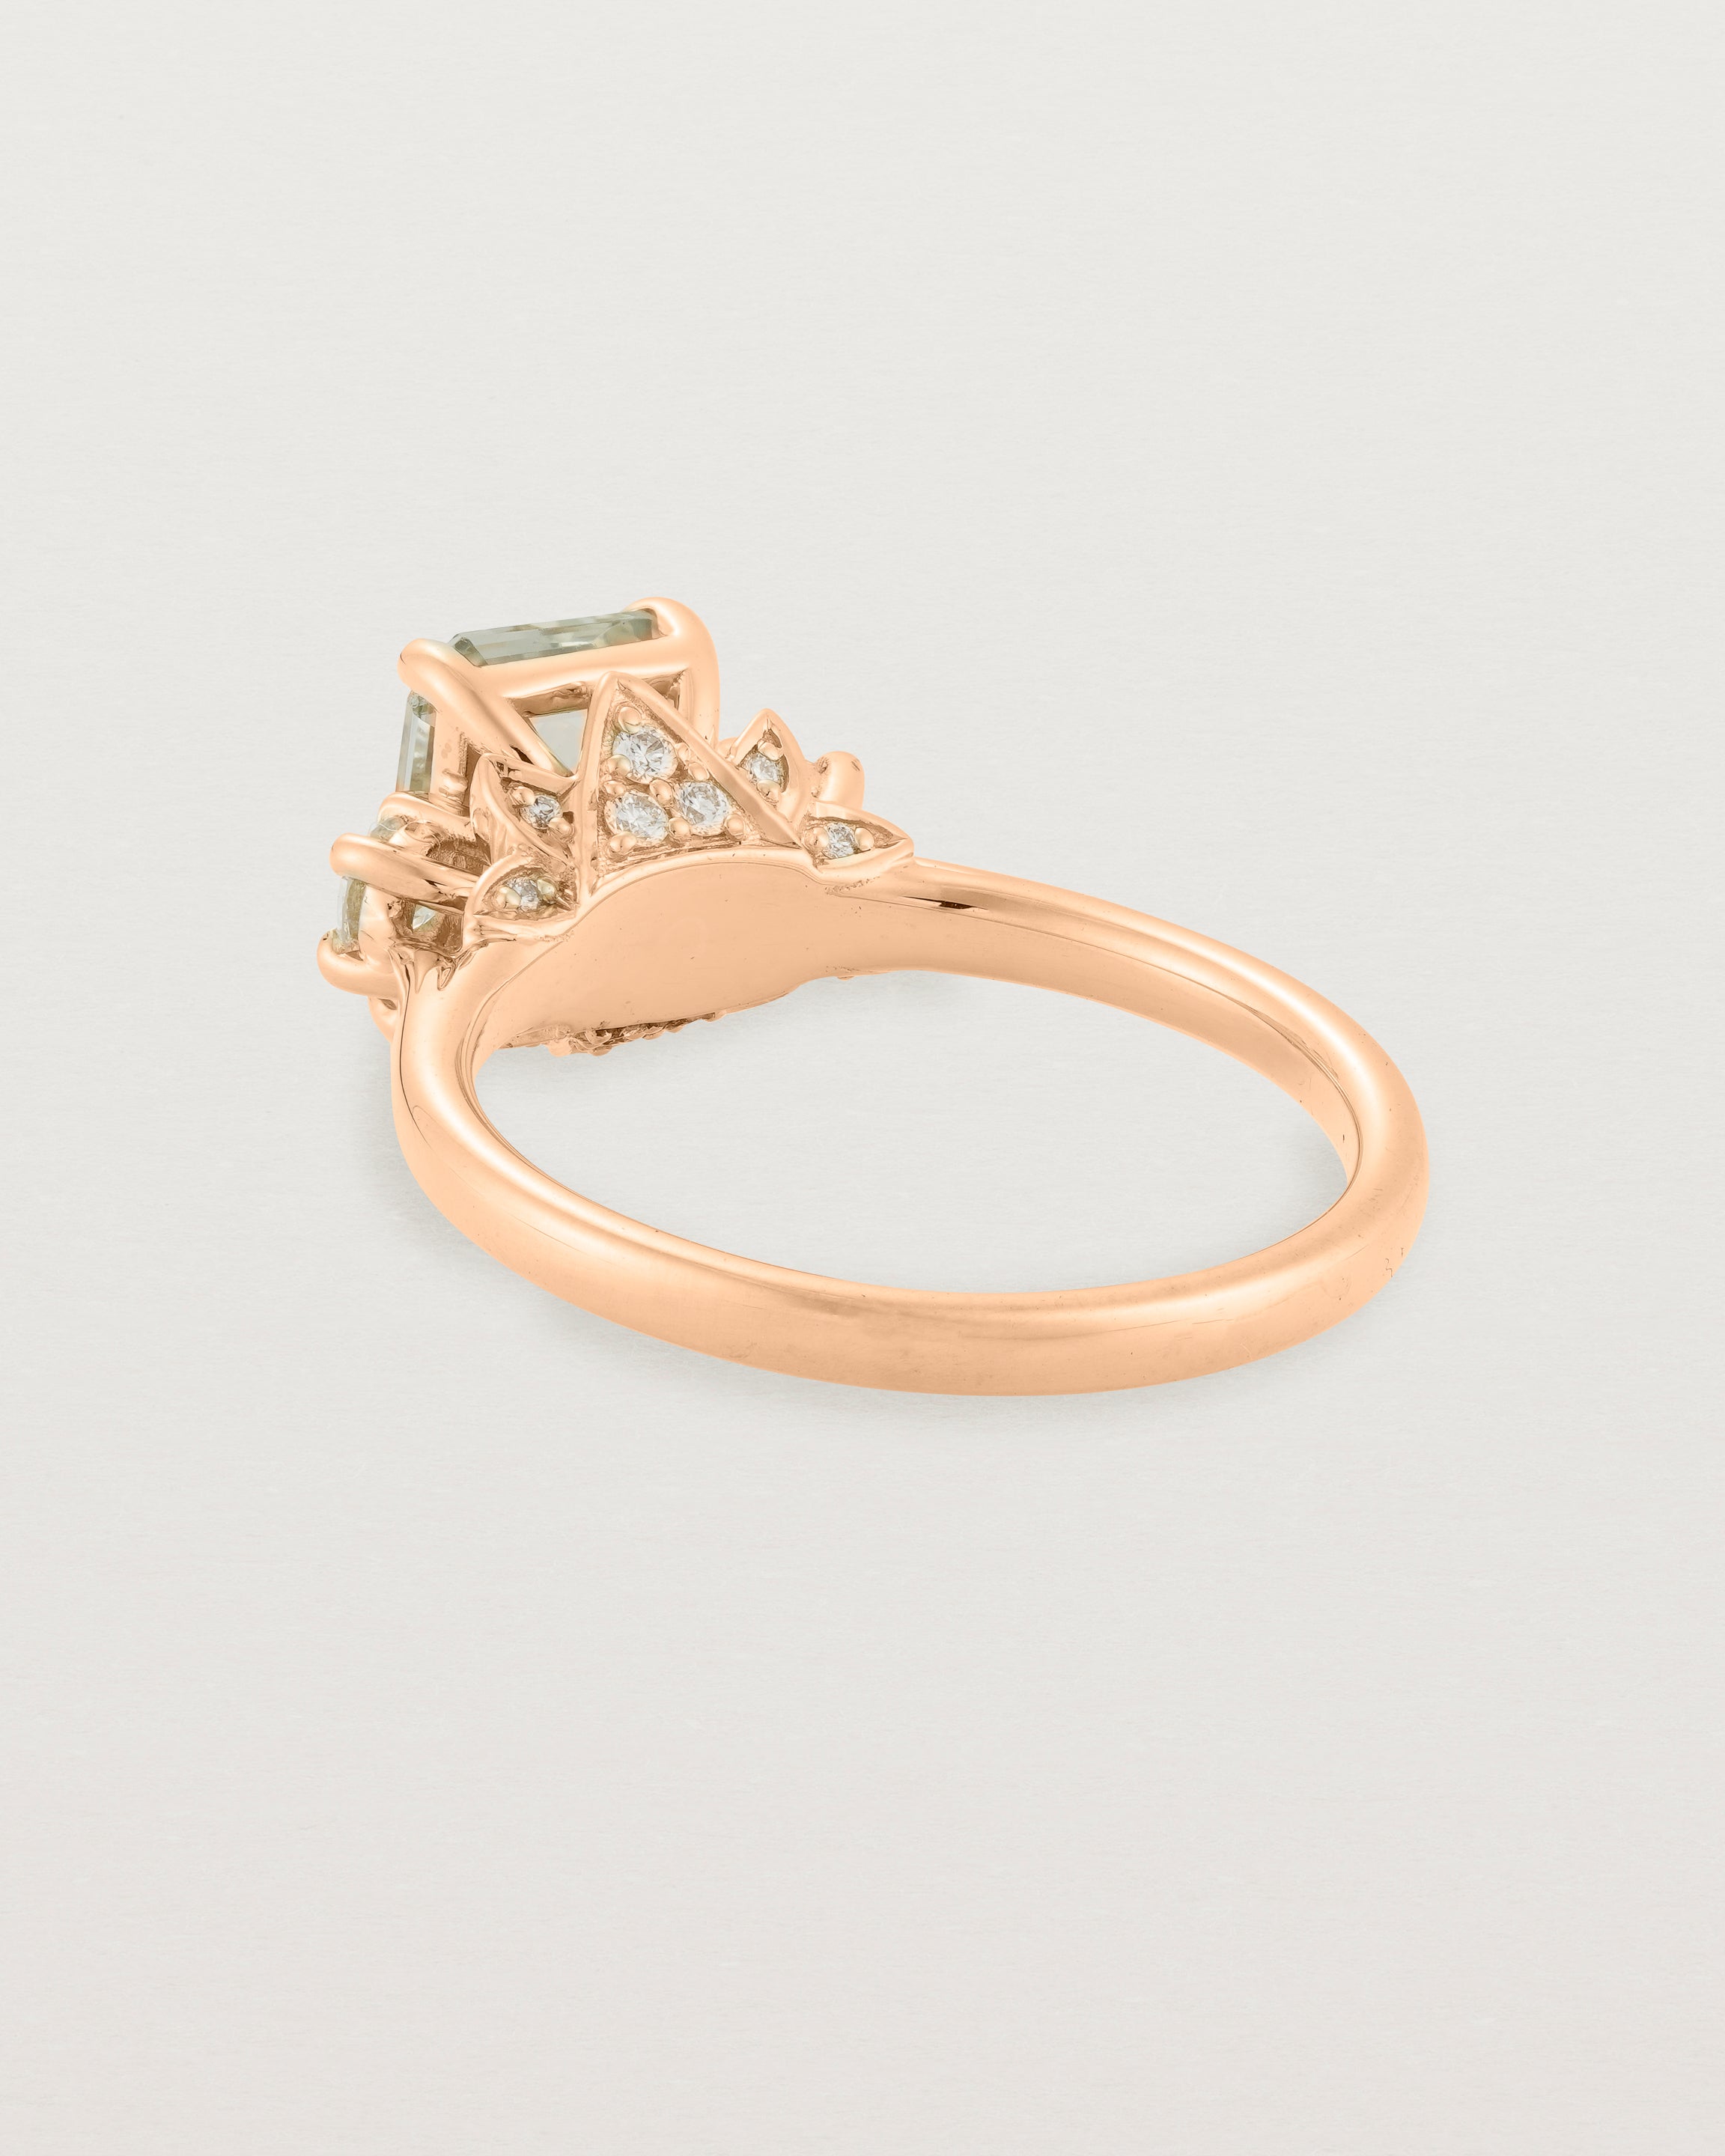 Back view of the Laurel Emerald Trio Ring | Green Amethyst | Rose Gold.